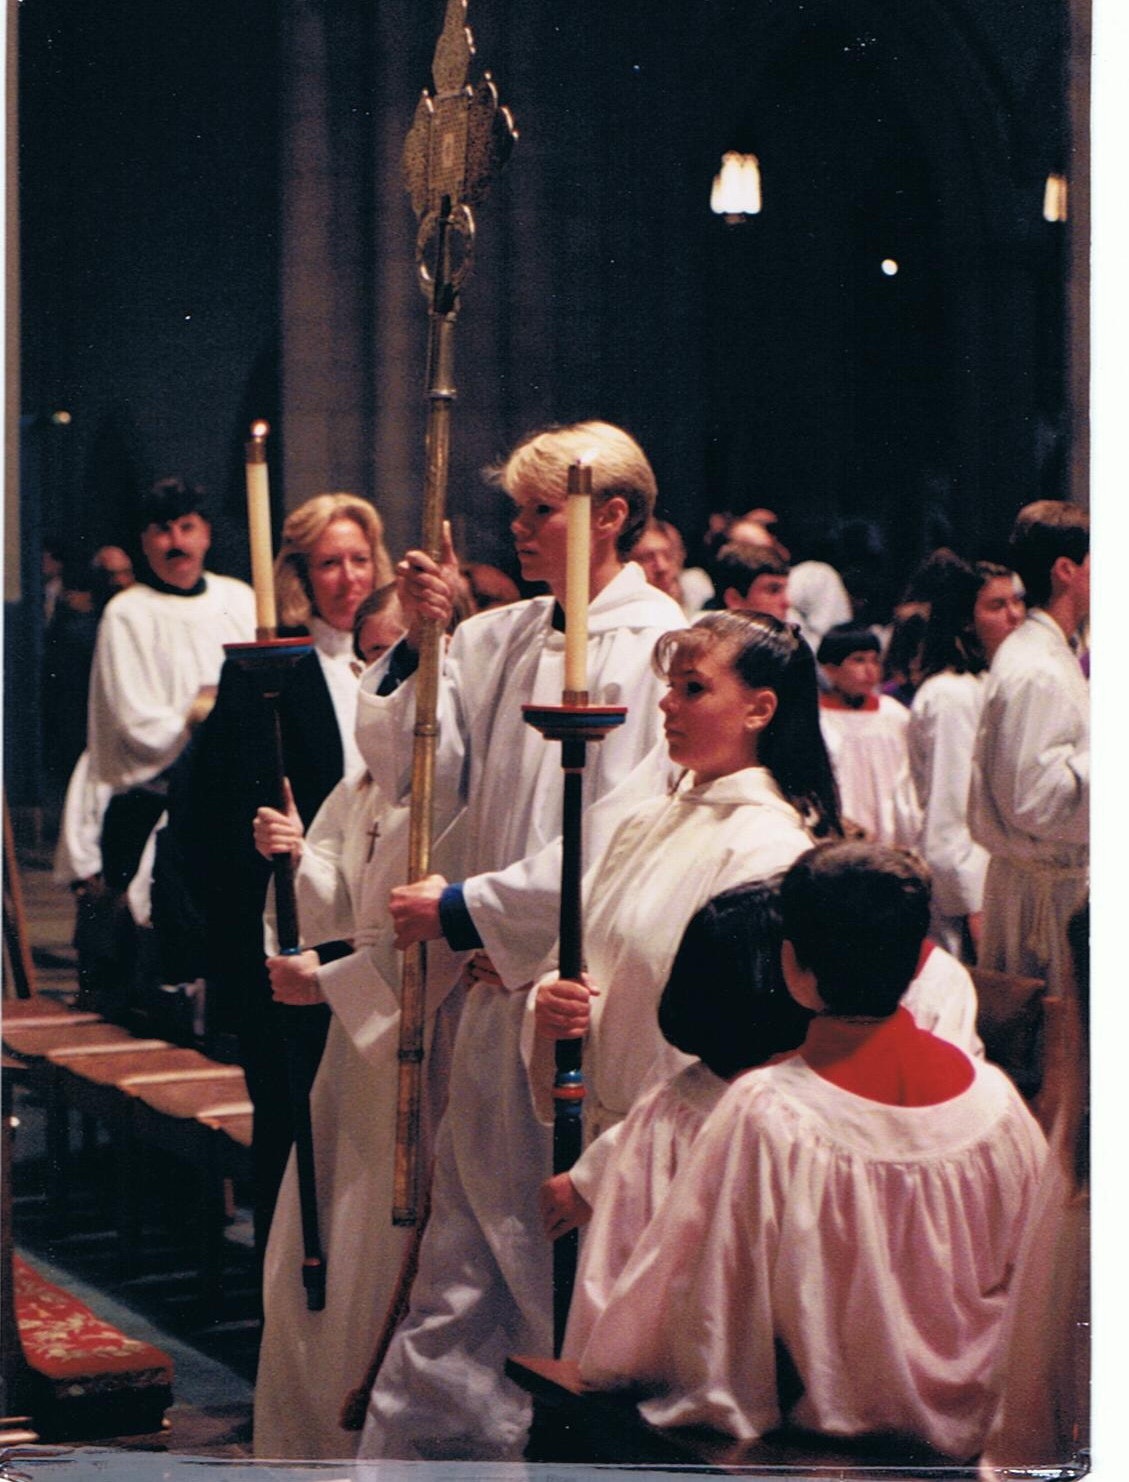 Justin at 16 carrying the cross at the National Cathedral